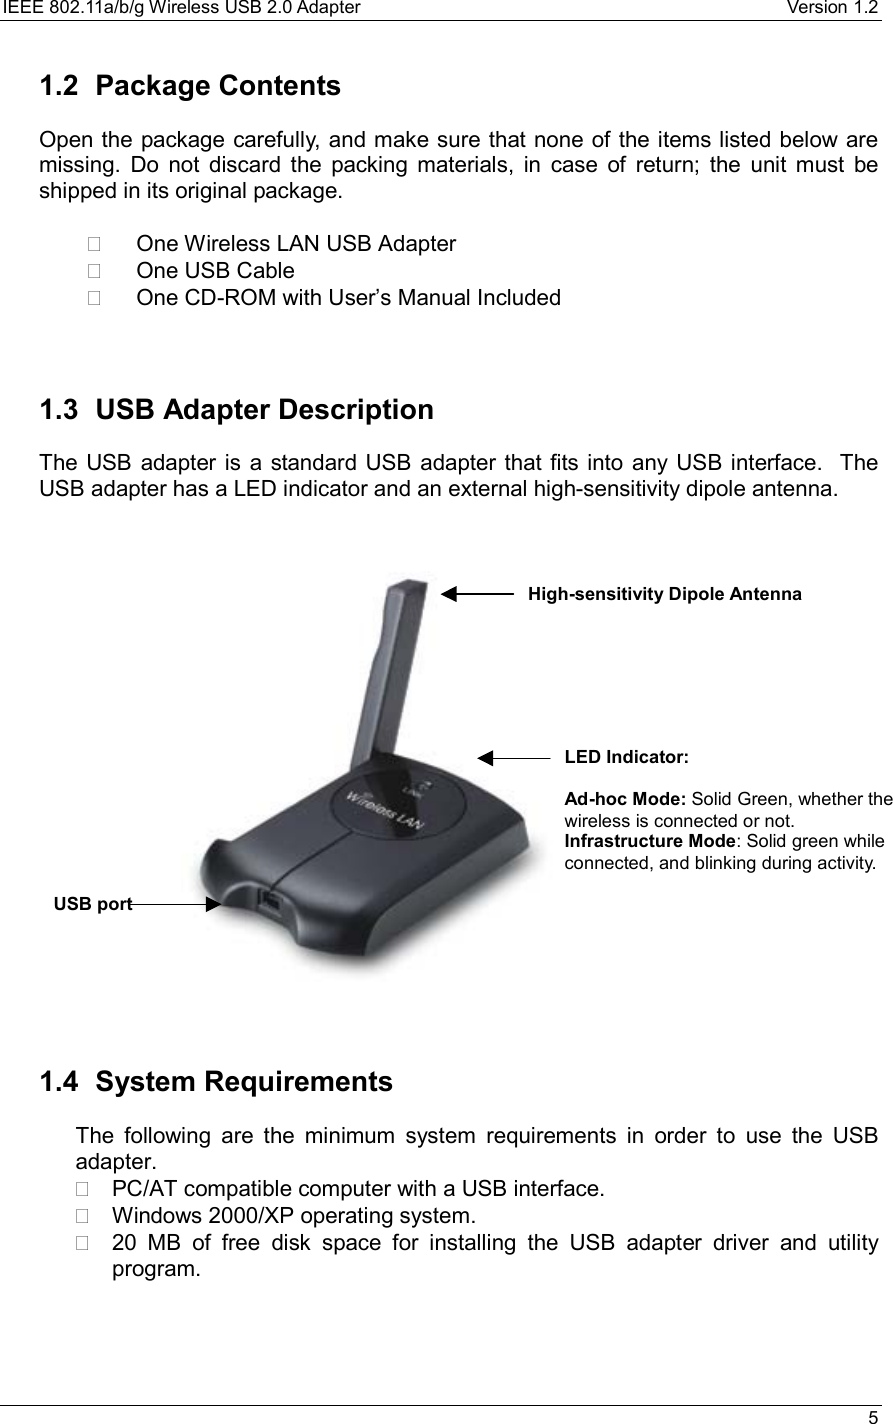 IEEE 802.11a/b/g Wireless USB 2.0 Adapter    Version 1.2   5  1.2 Package Contents Open the package carefully, and make sure that none of the items listed below are missing. Do not discard the packing materials, in case of return; the unit must be shipped in its original package.    One Wireless LAN USB Adapter   One USB Cable   One CD-ROM with User’s Manual Included   1.3 USB Adapter Description The USB adapter is a standard USB adapter that fits into any USB interface.  The USB adapter has a LED indicator and an external high-sensitivity dipole antenna.                        1.4 System Requirements The following are the minimum system requirements in order to use the USB adapter.   PC/AT compatible computer with a USB interface.   Windows 2000/XP operating system.   20 MB of free disk space for installing the USB adapter driver and utility program.    USB port High-sensitivity Dipole Antenna LED Indicator:  Ad-hoc Mode: Solid Green, whether the wireless is connected or not. Infrastructure Mode: Solid green while connected, and blinking during activity. 